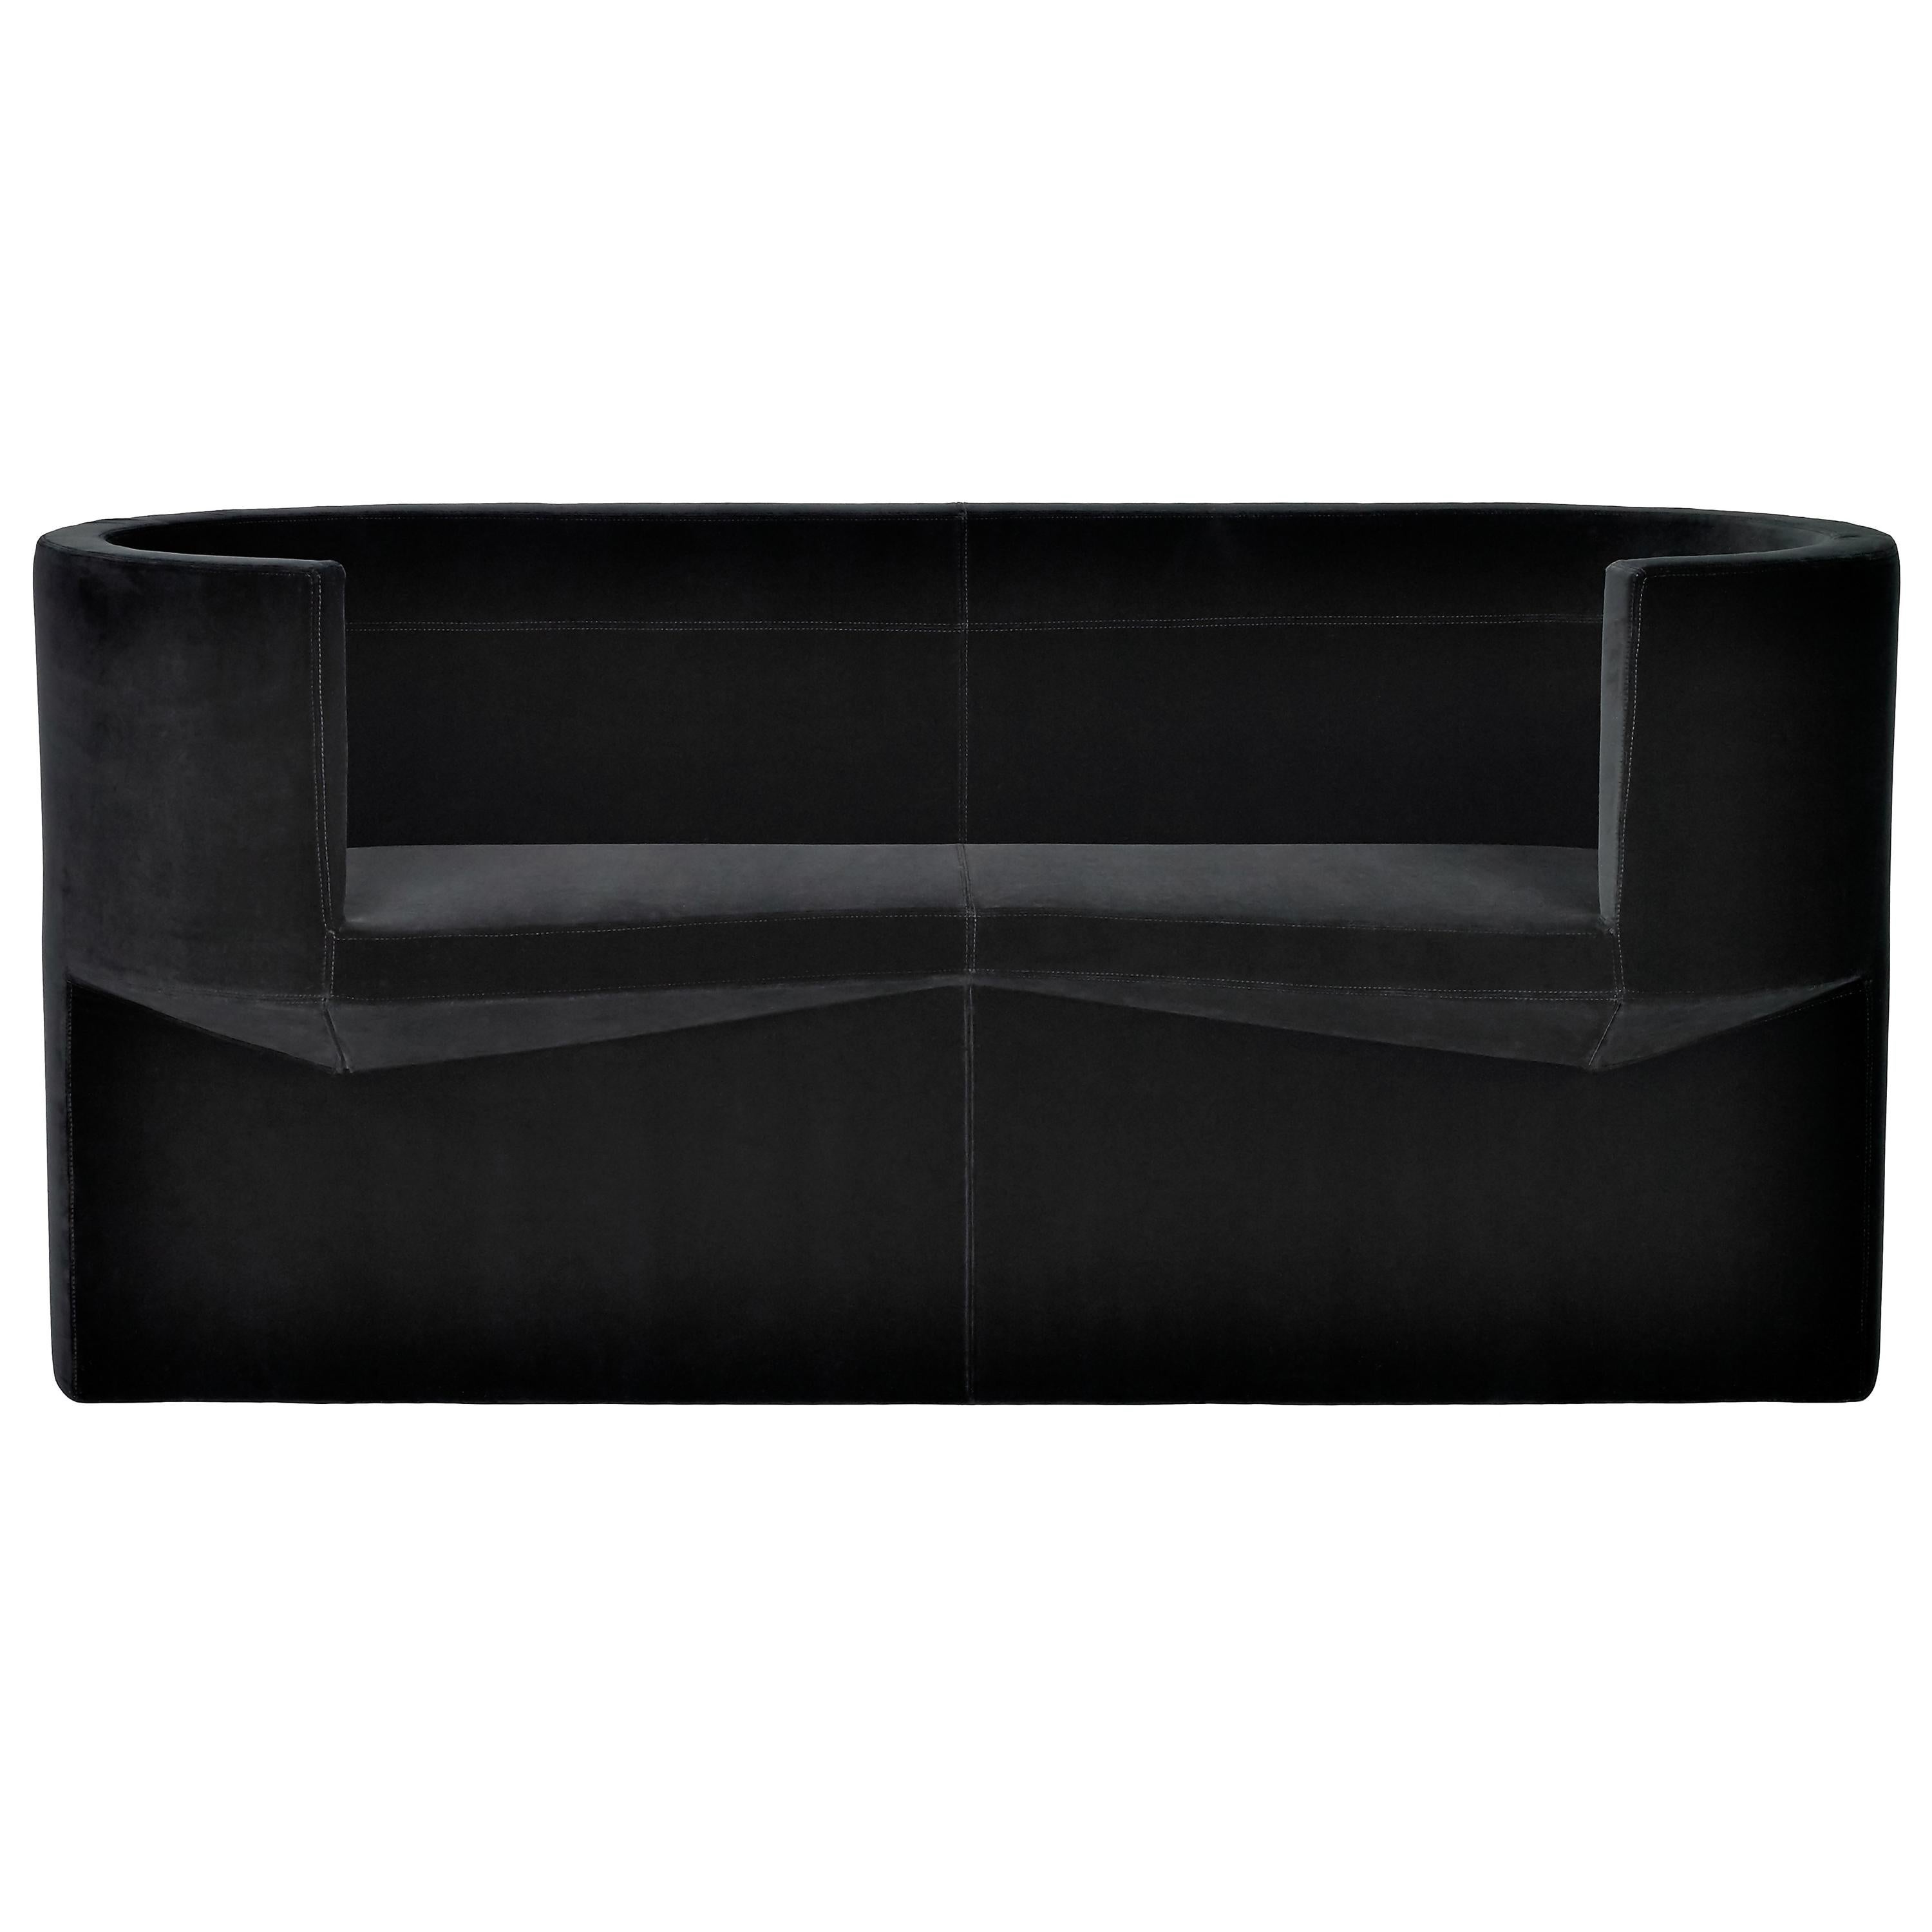 Customizable ClassiCon Odin Sofa  by Konstantin Grcic For Sale